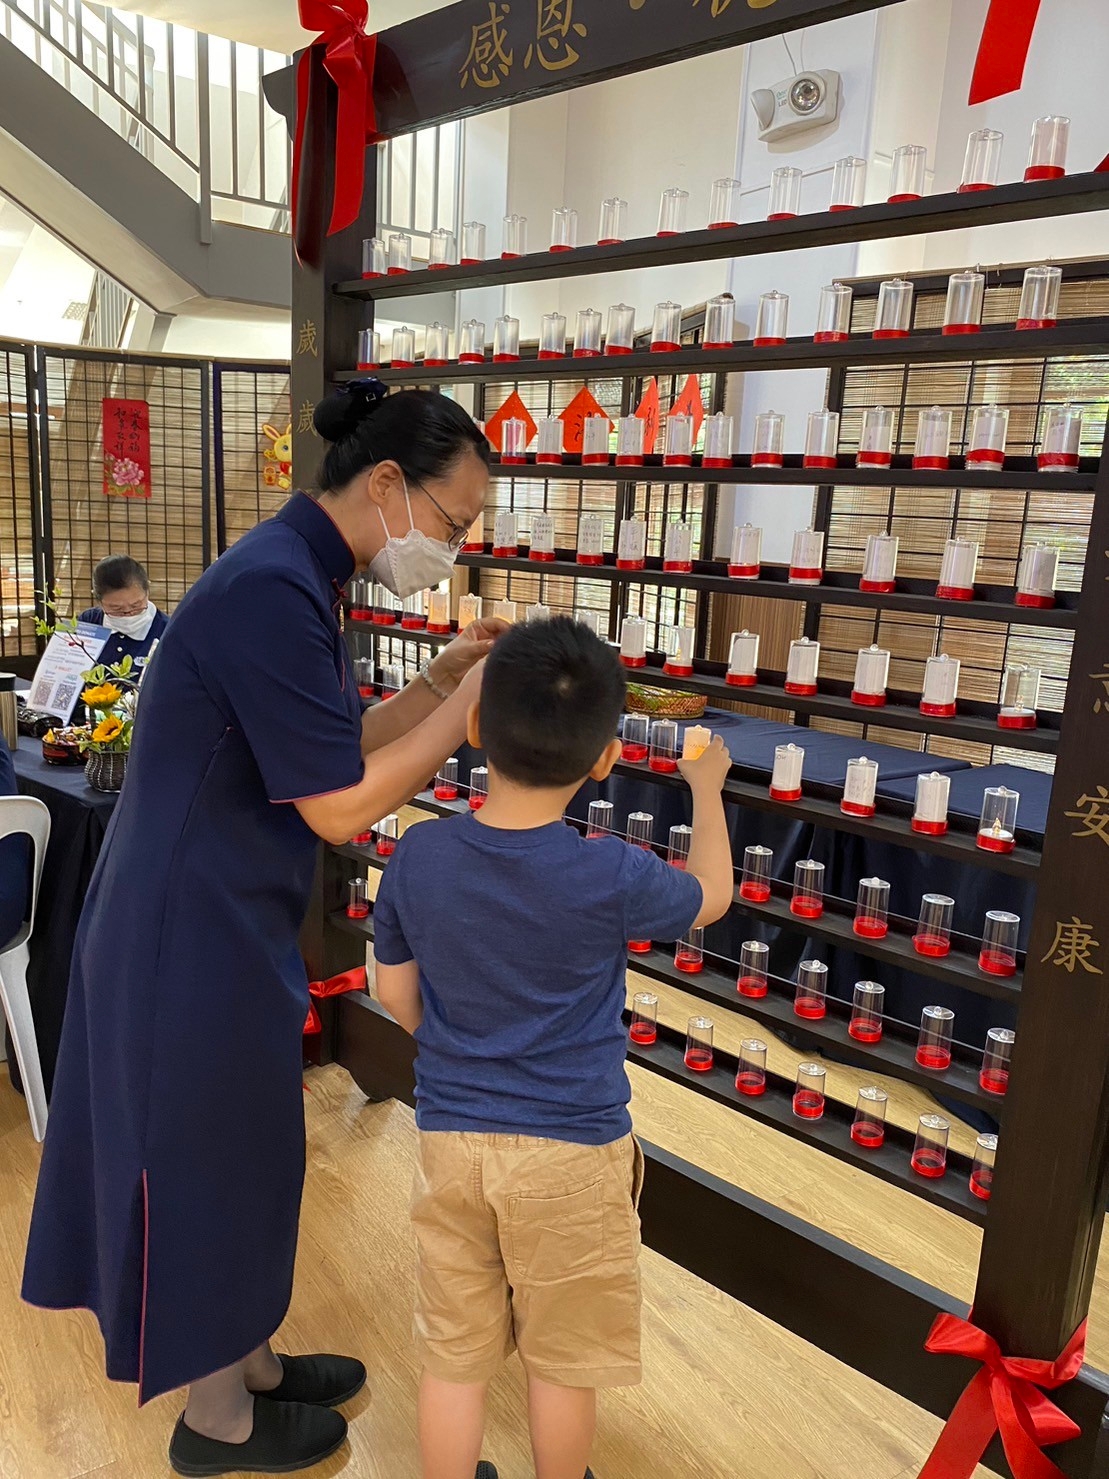 A volunteer helps a child place his handwritten wish in a candle holder. 【Photo by Matt Serrano】